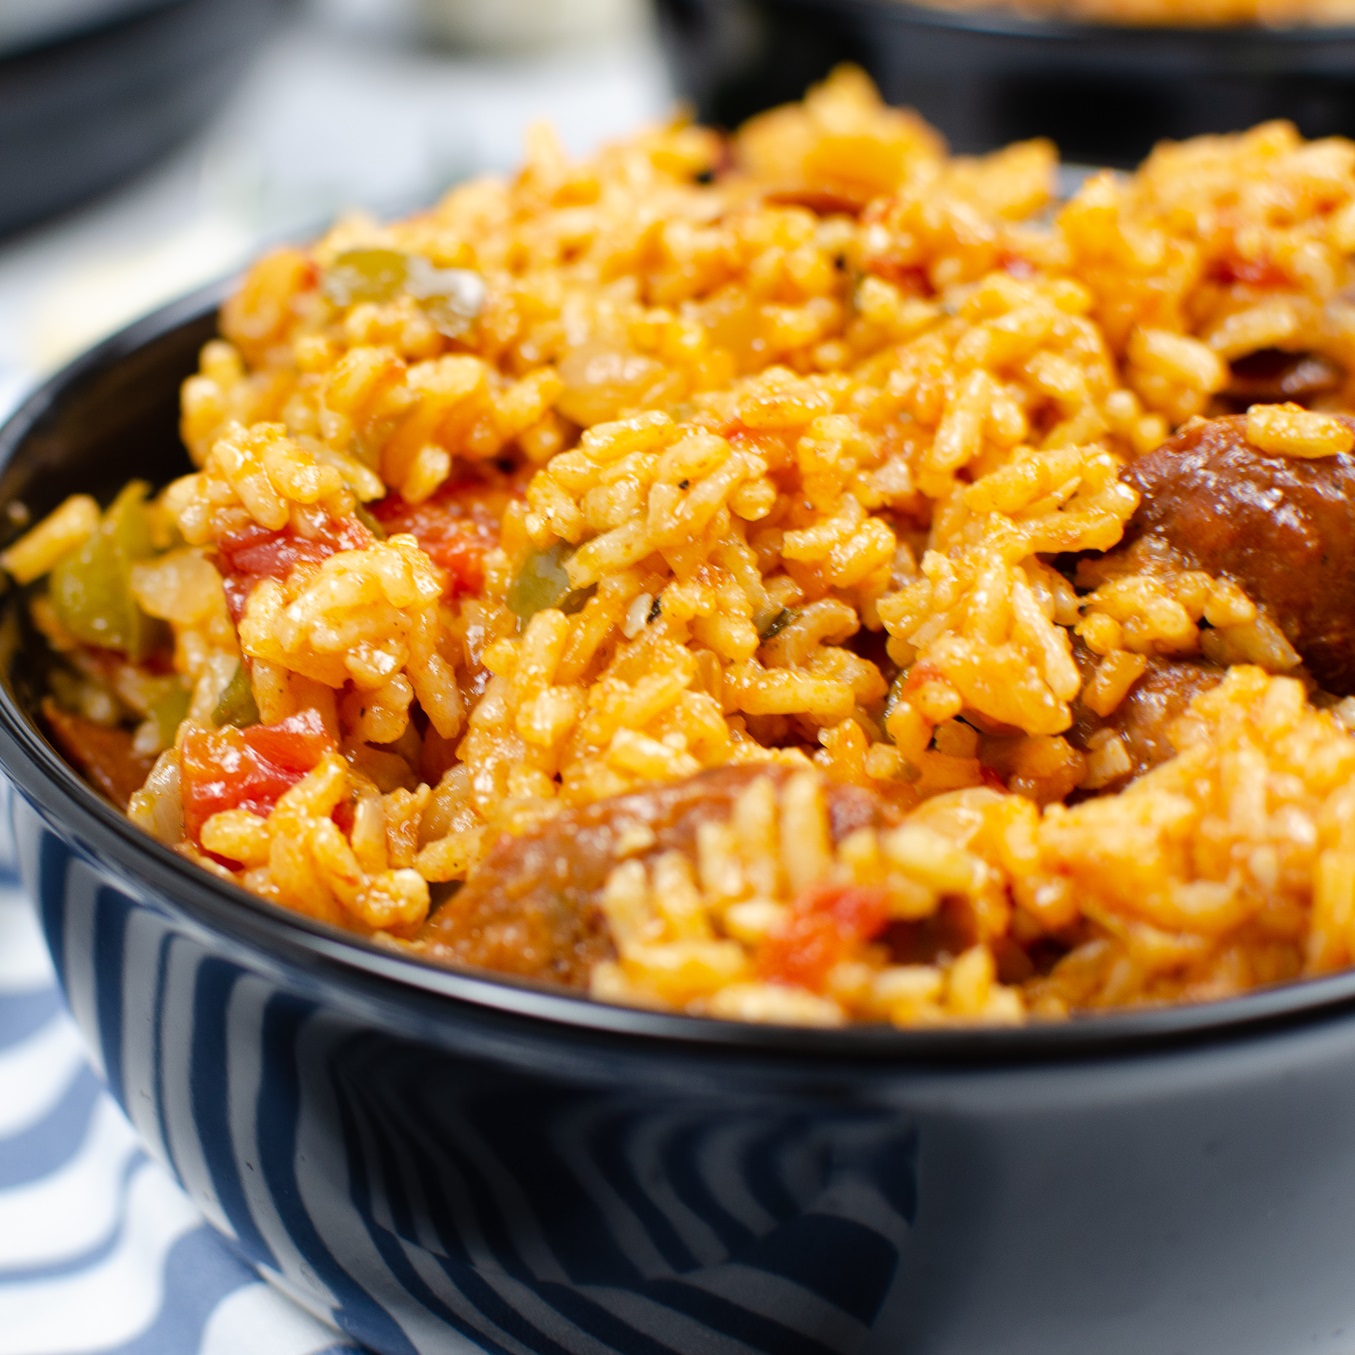 Creole Jambalaya with Andouille Sausage in a black bowl